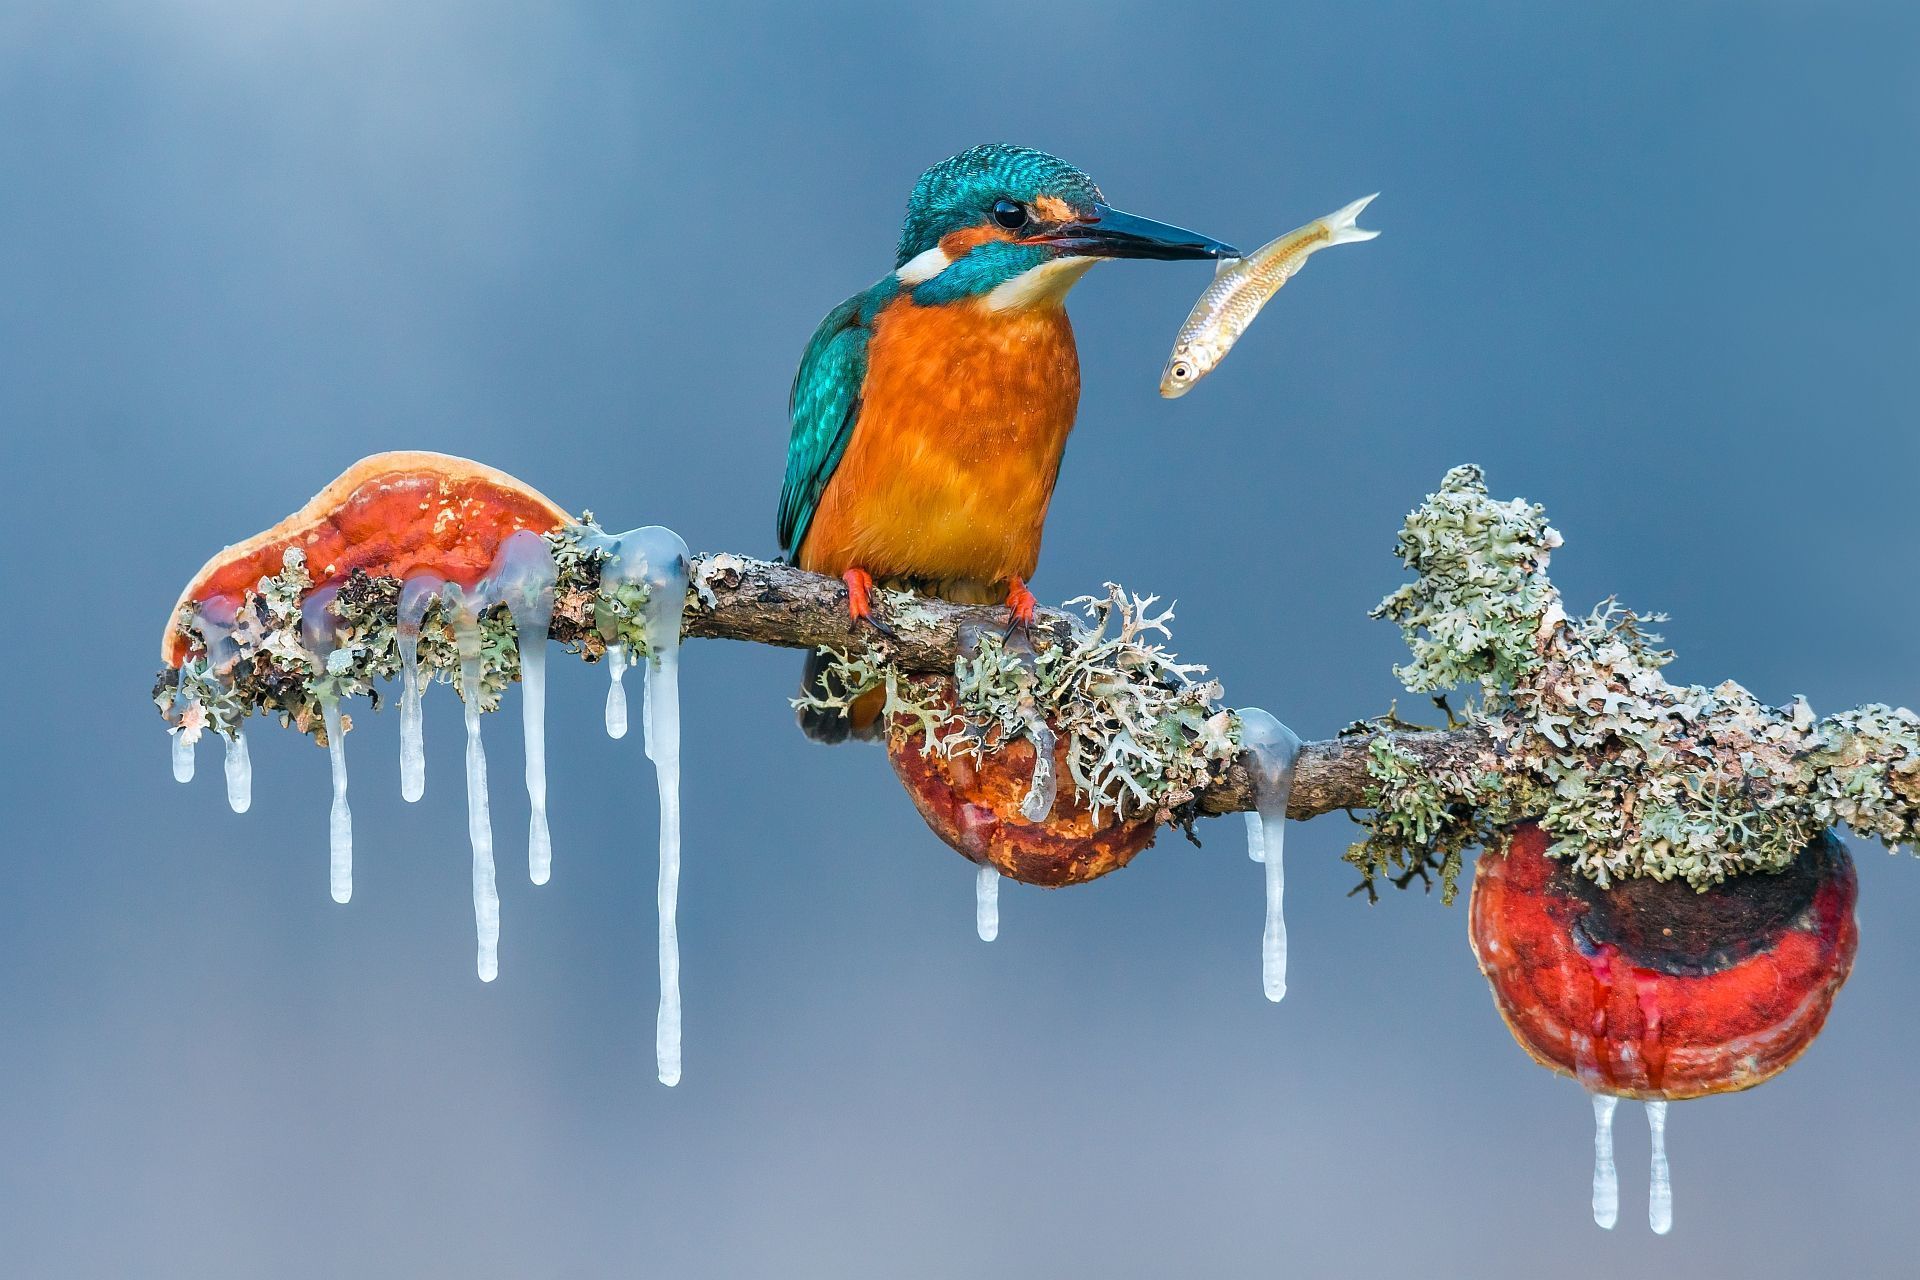 General 1920x1280 nature animals birds branch icicle winter fish ice clear sky kingfisher closeup